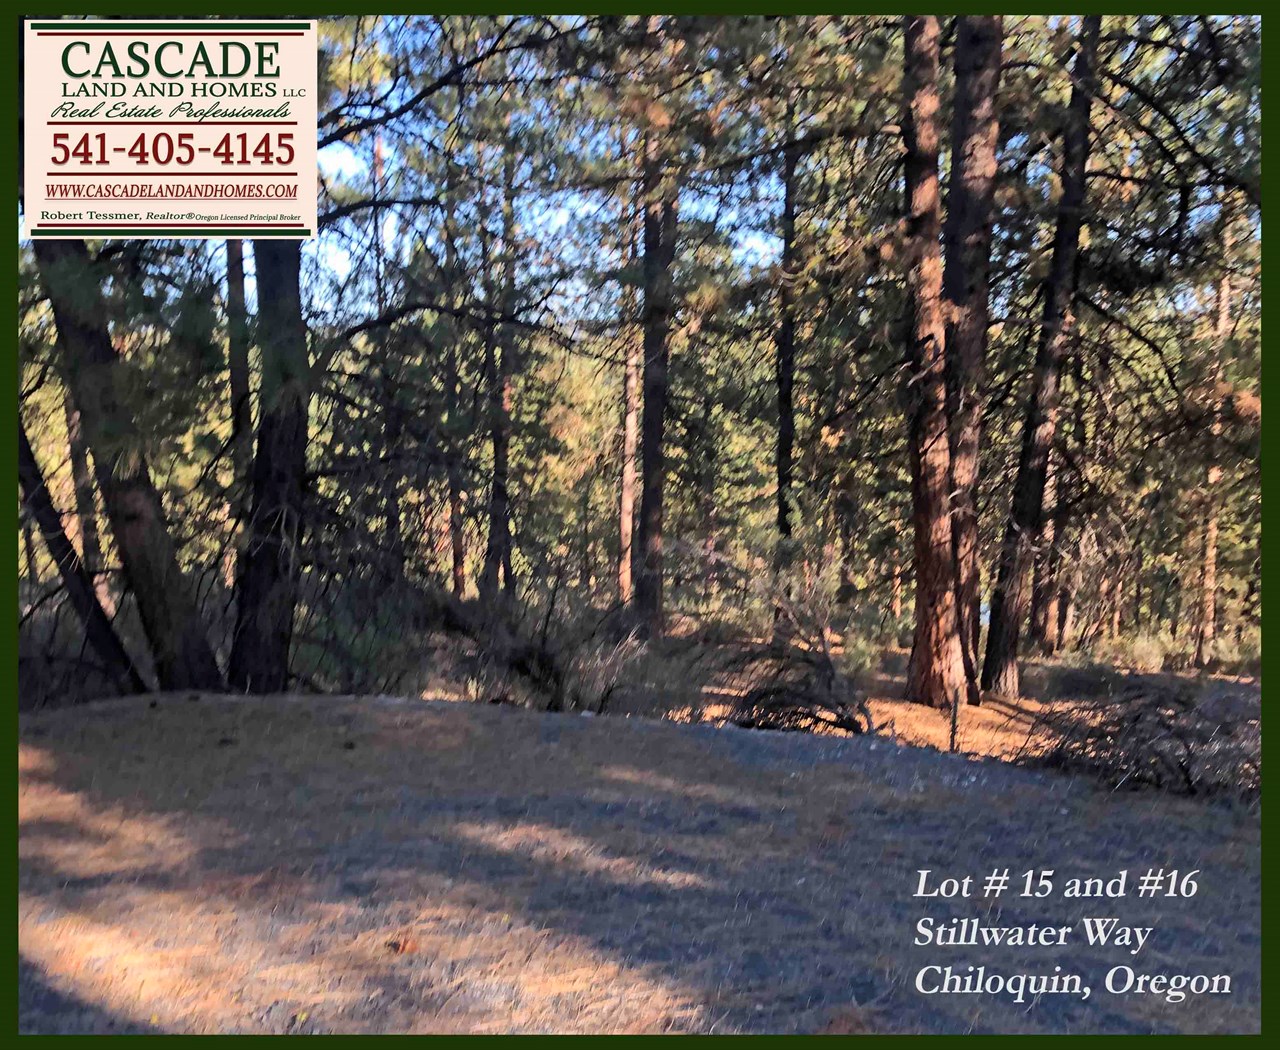 the property is heavily forested, and there are many possible building sites. bring your house plans and explore the possibilities!